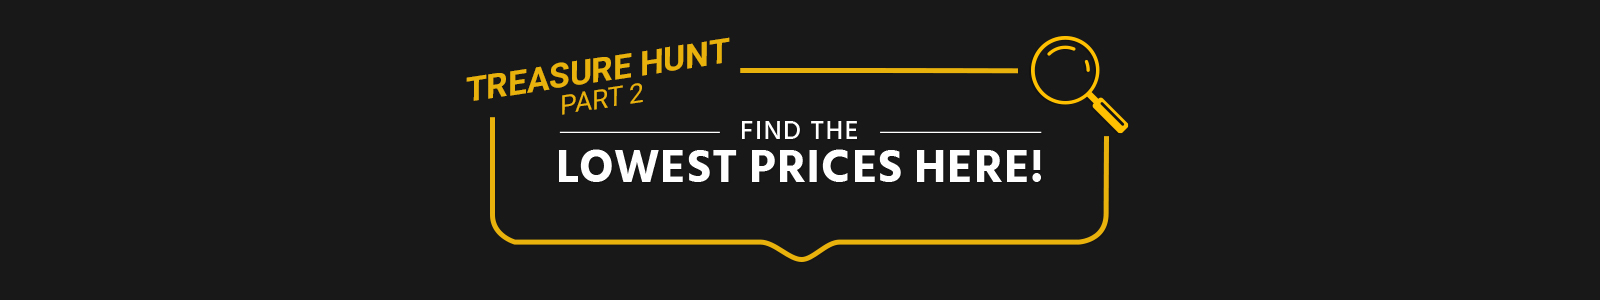 Treasure Hunt

Part 2

Find the Lowest Prices Here!
Shop Now